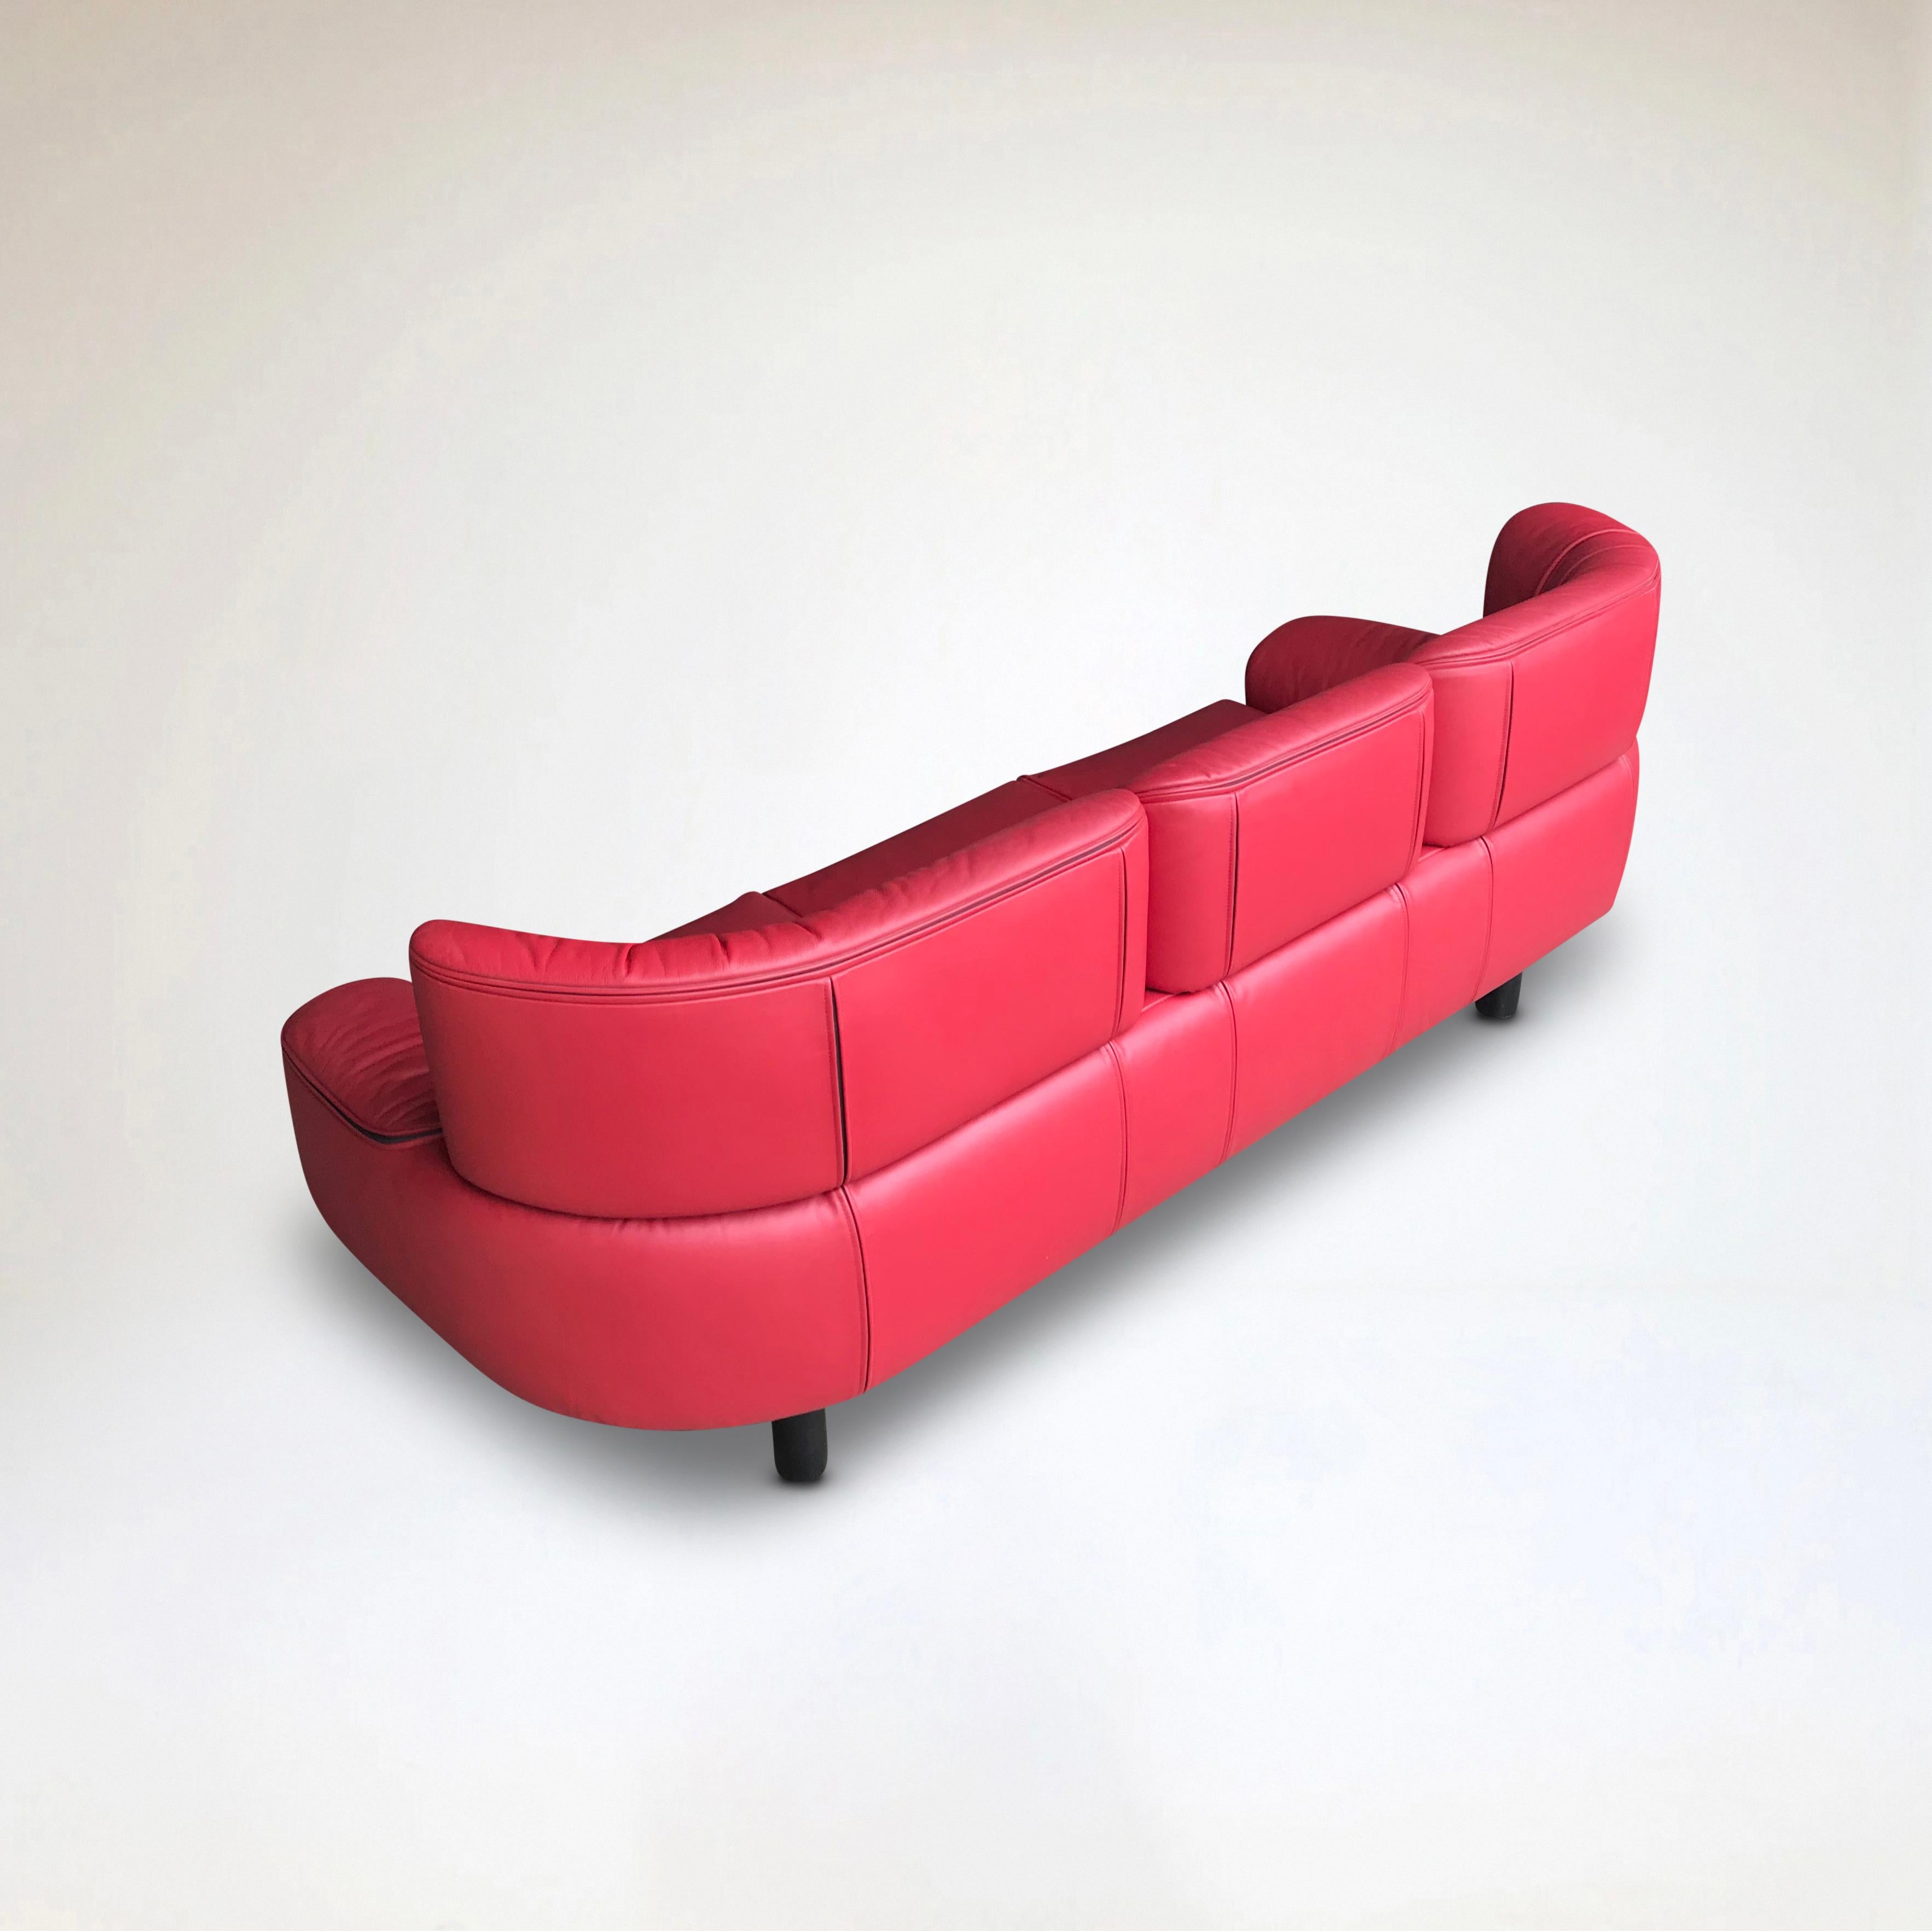 Bull 3-seater red leather sofa by Gianfranco Frattini for Cassina 1987 For Sale 9